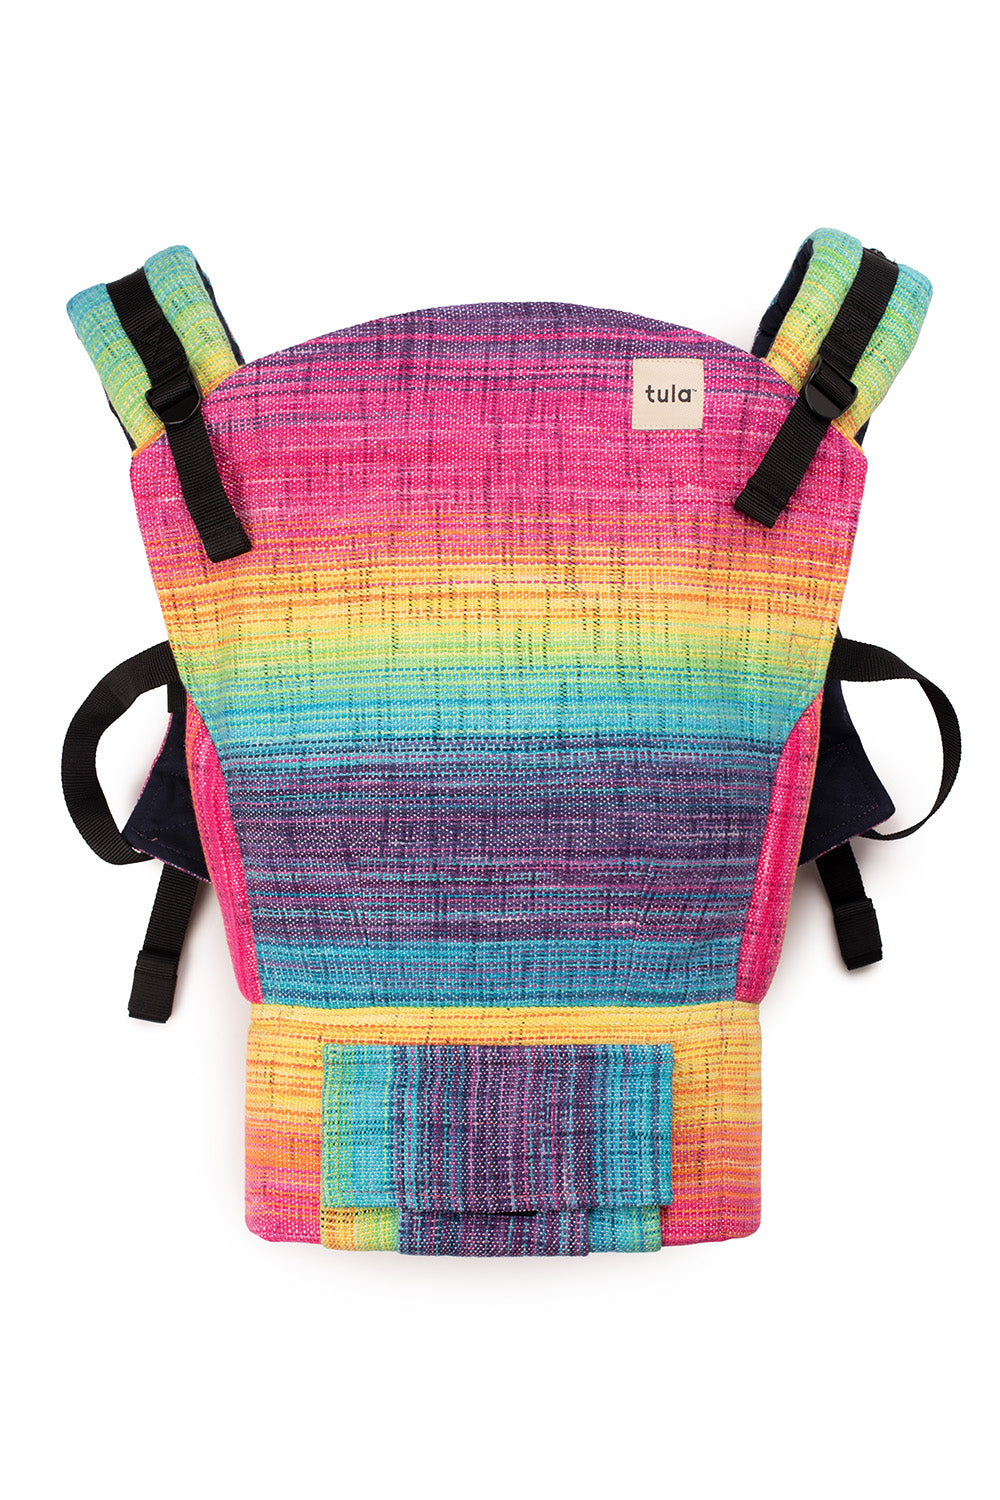 Double Trouble - Signature Handwoven Standard Baby Carrier